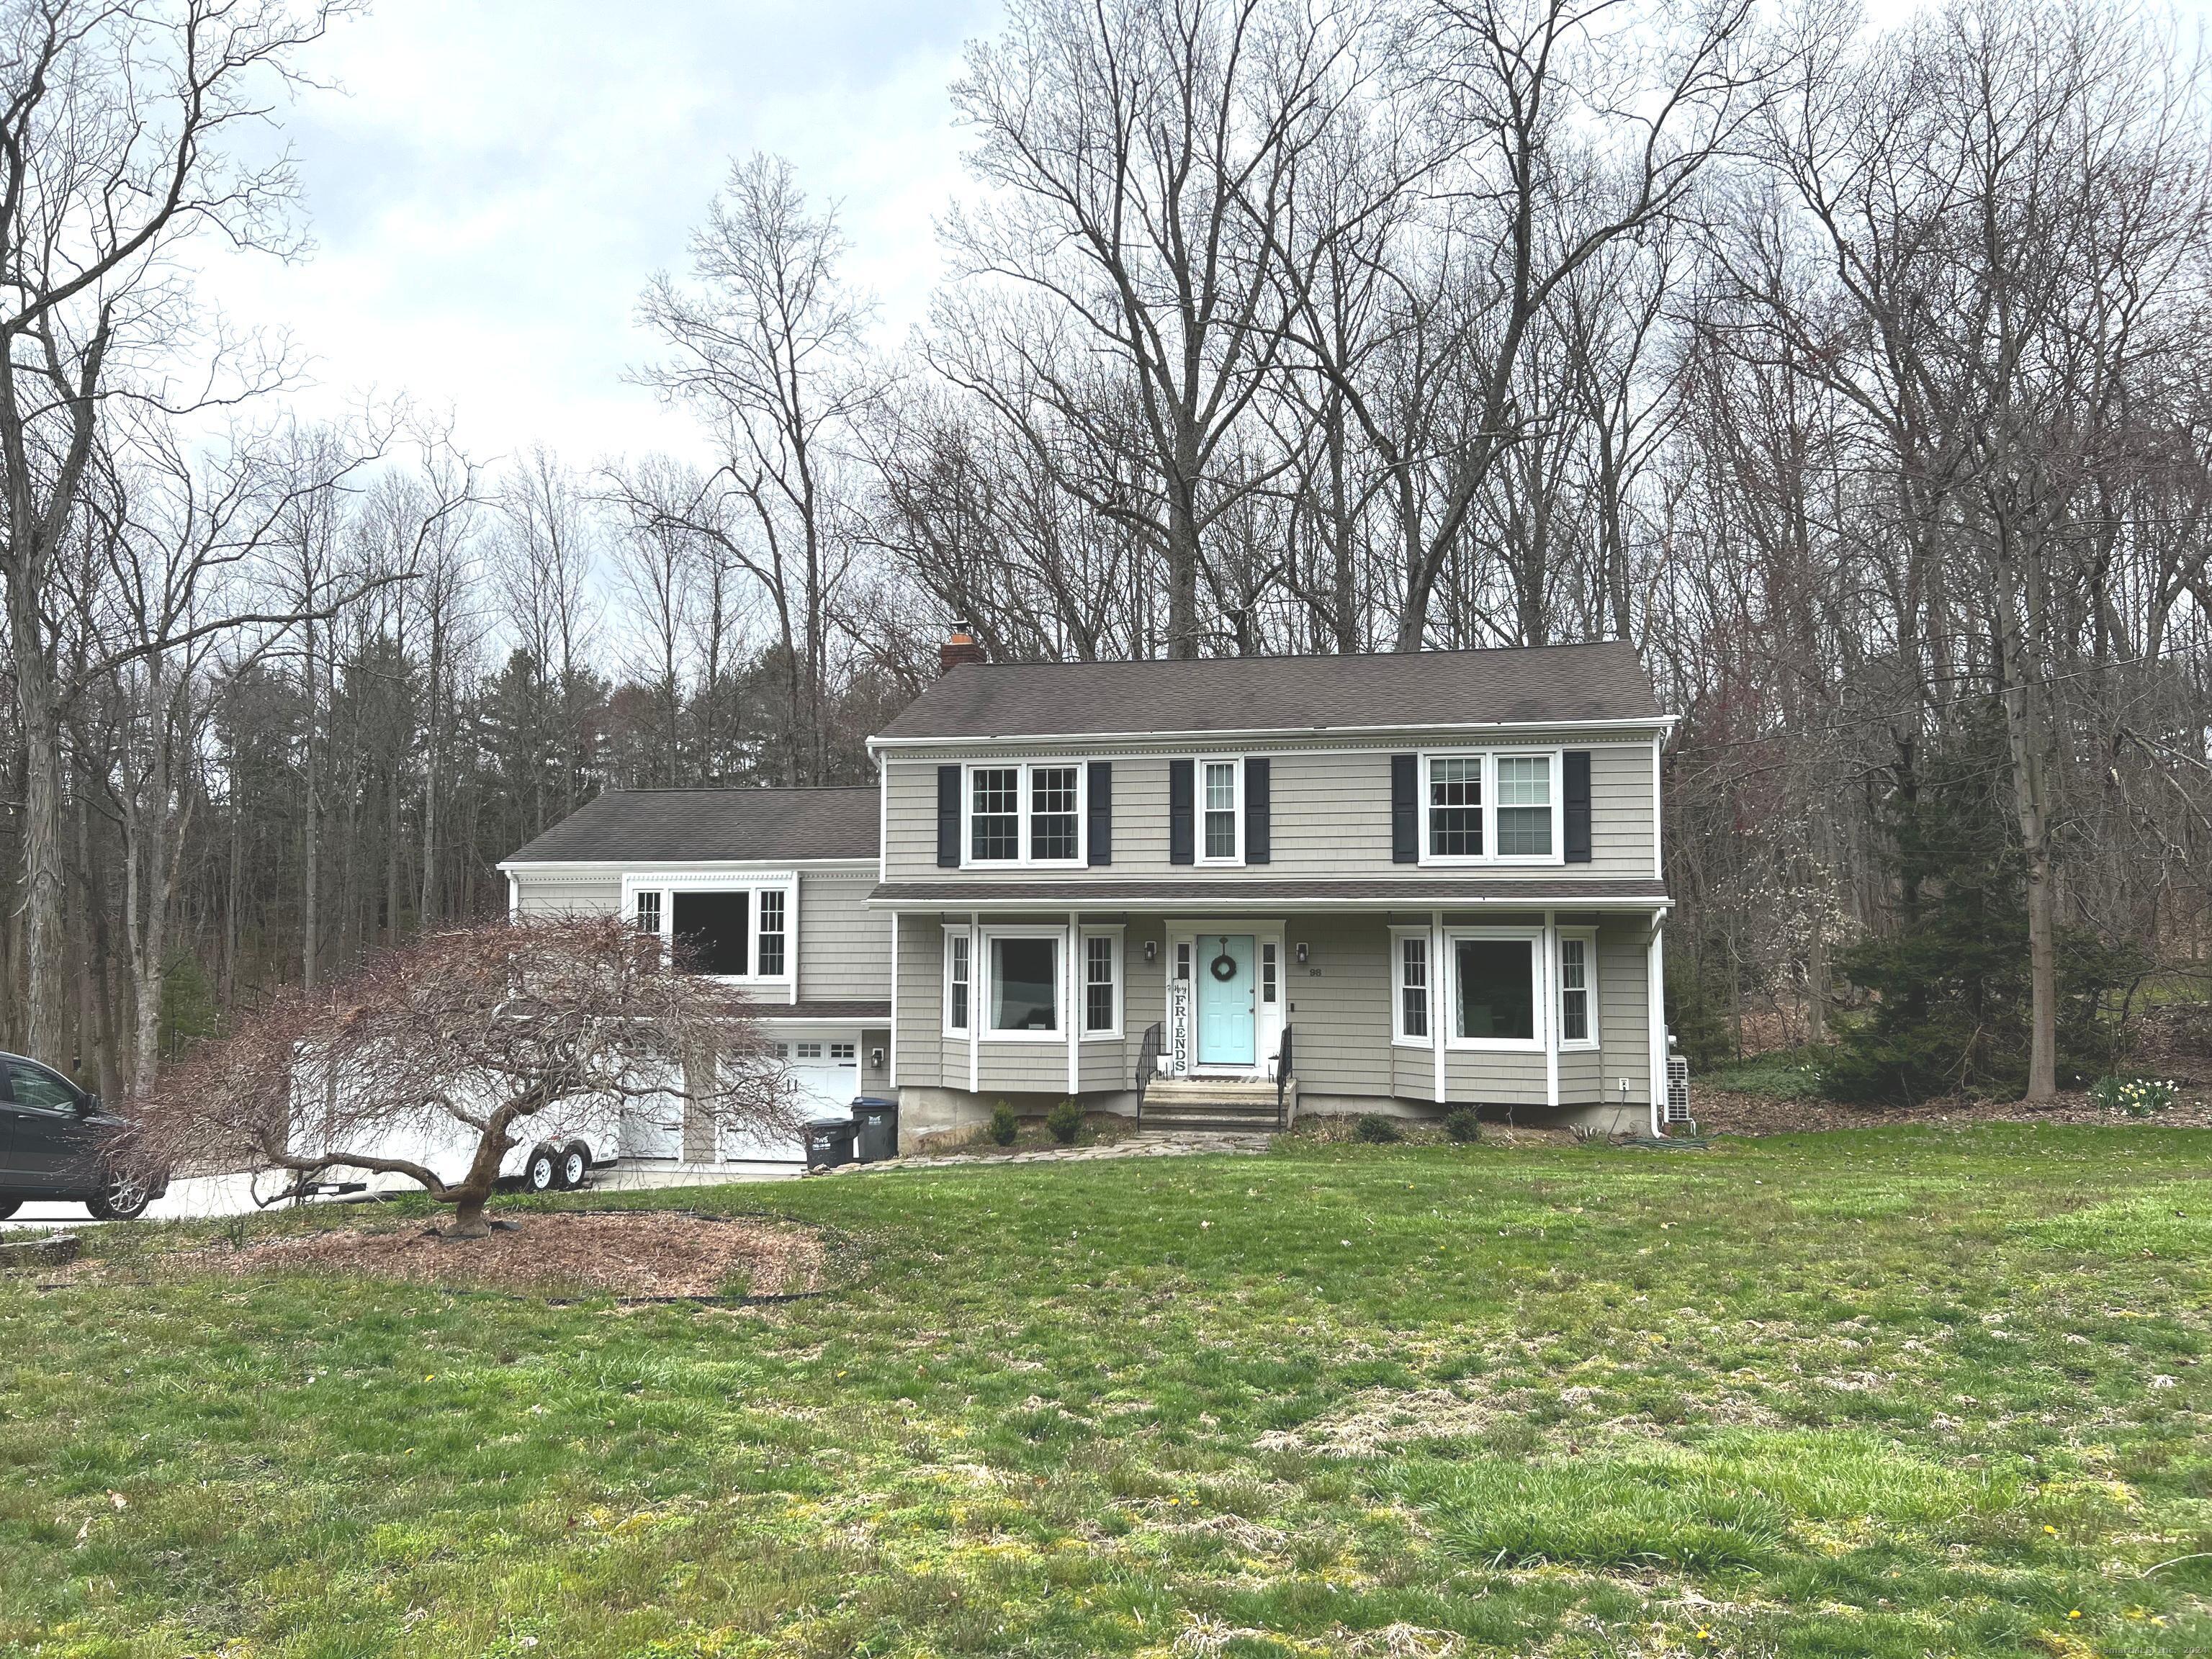 98 Old Hollow Road, Trumbull, Connecticut - 4 Bedrooms  
3 Bathrooms  
8 Rooms - 